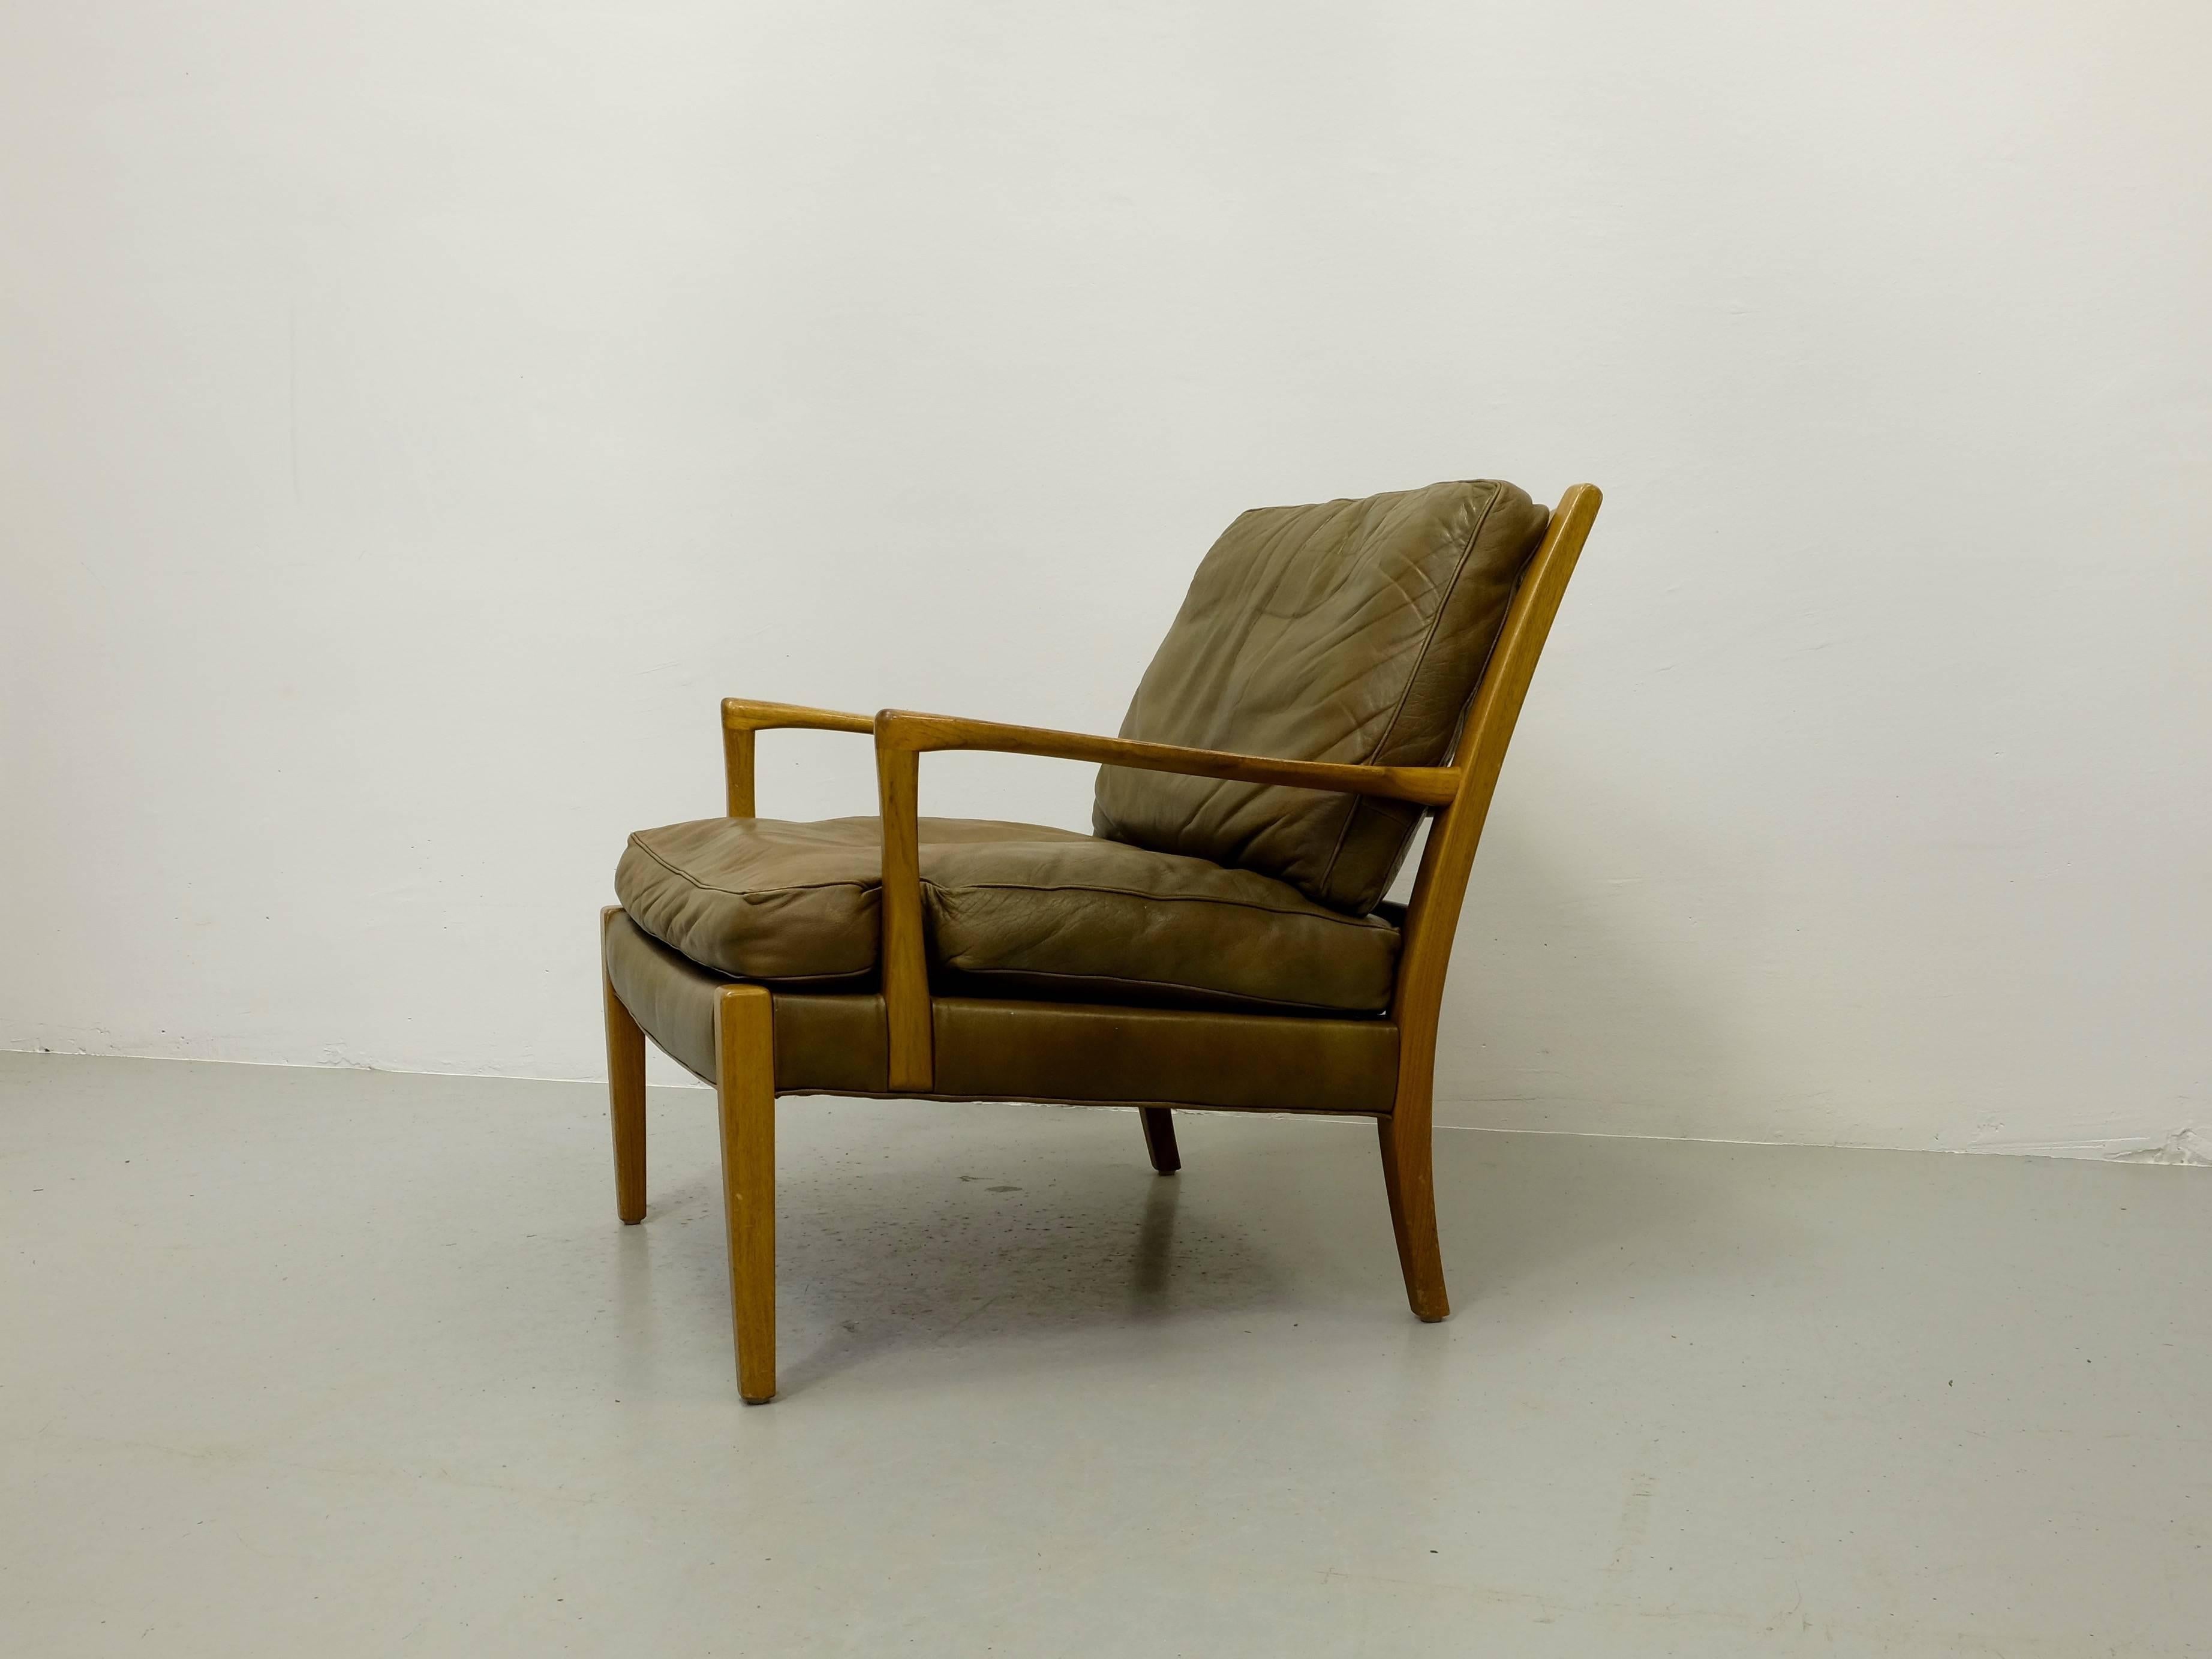 Easy chair model Löven designed by Arne Norell. Produced by Arne Norell AB in Aneby, Sweden, 1960s.

Please note: Global front door shipping: $299.